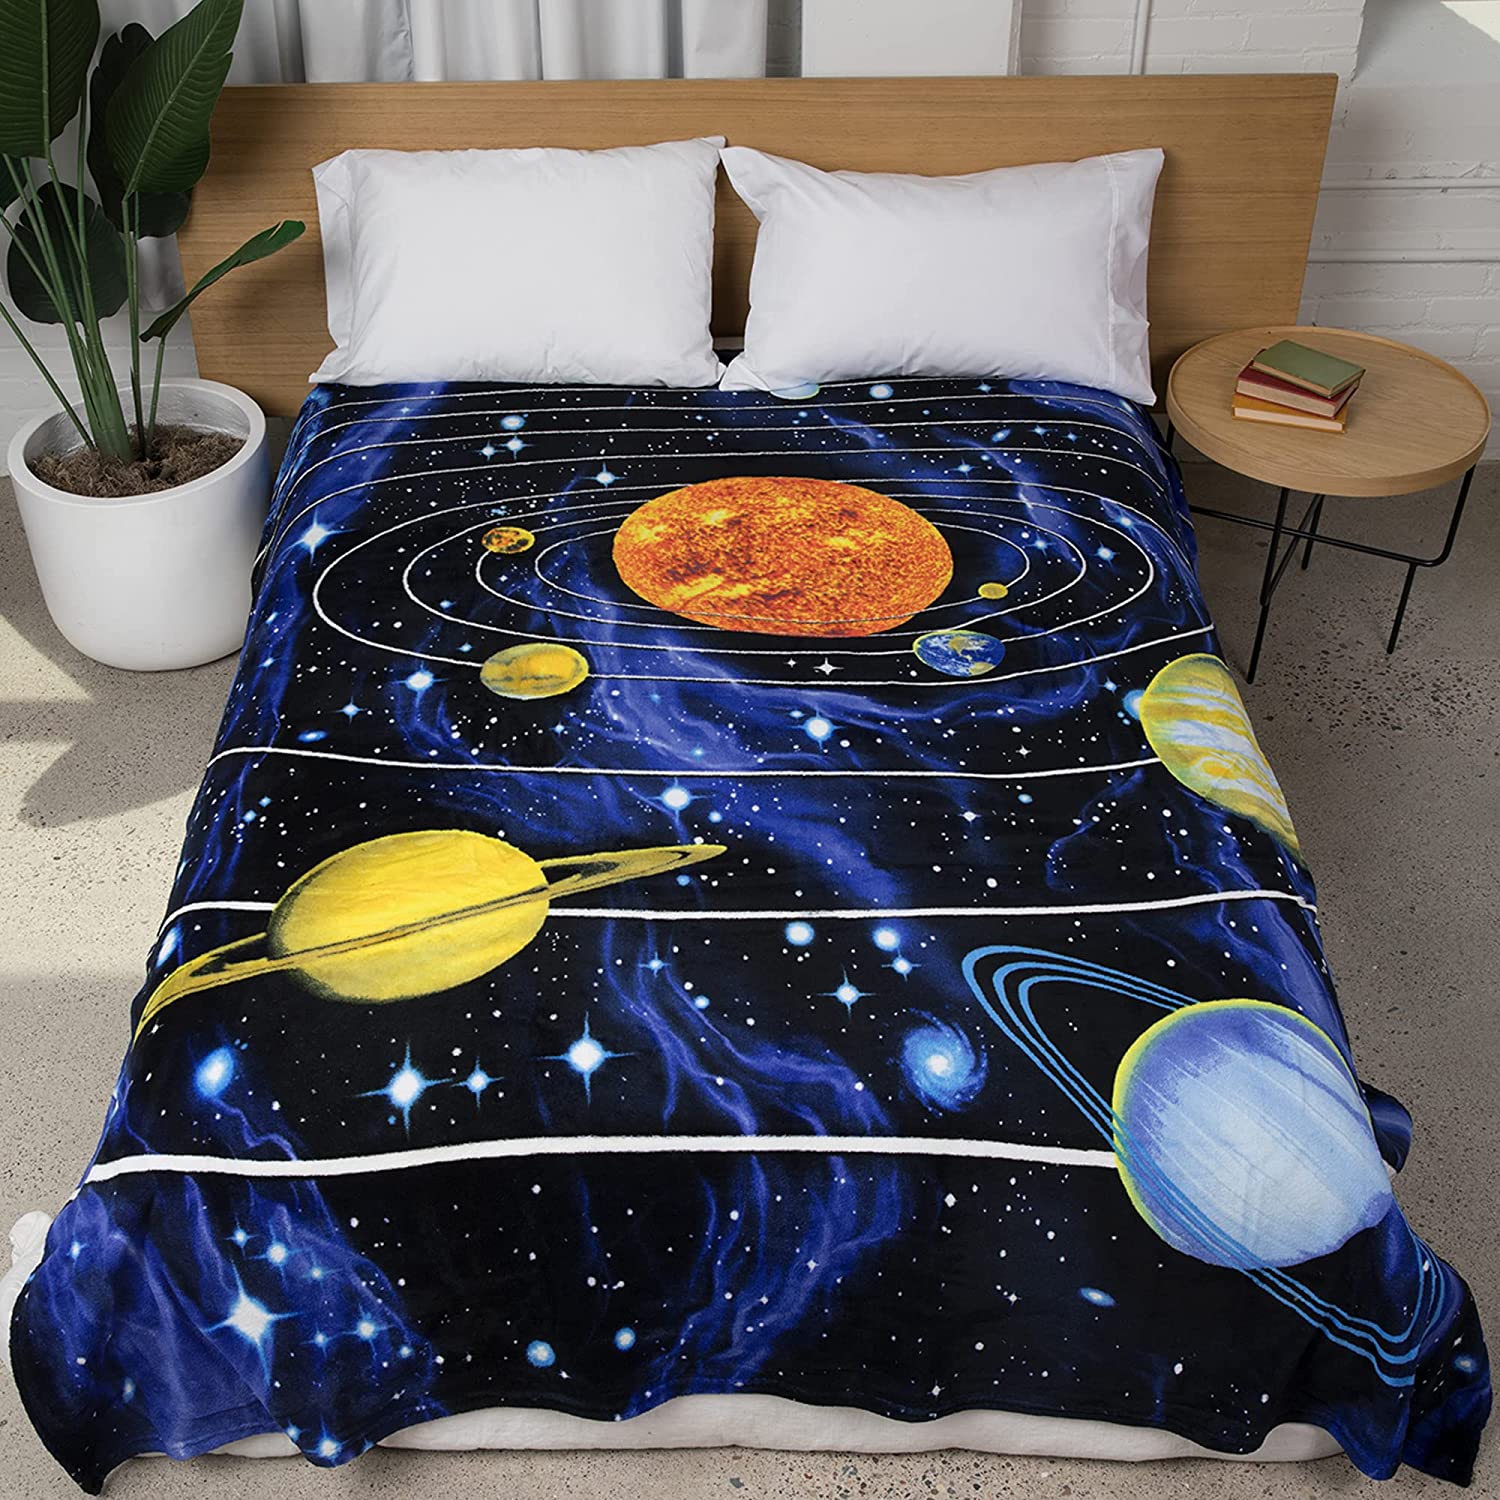 Dawhud Direct Solar System Fleece Blanket for Bed, 75" x 90" Queen Size Space Fleece Throw Blanket for Boys, Men, Unisex and Kids – Super Soft Plush Planetary Blanket Throw